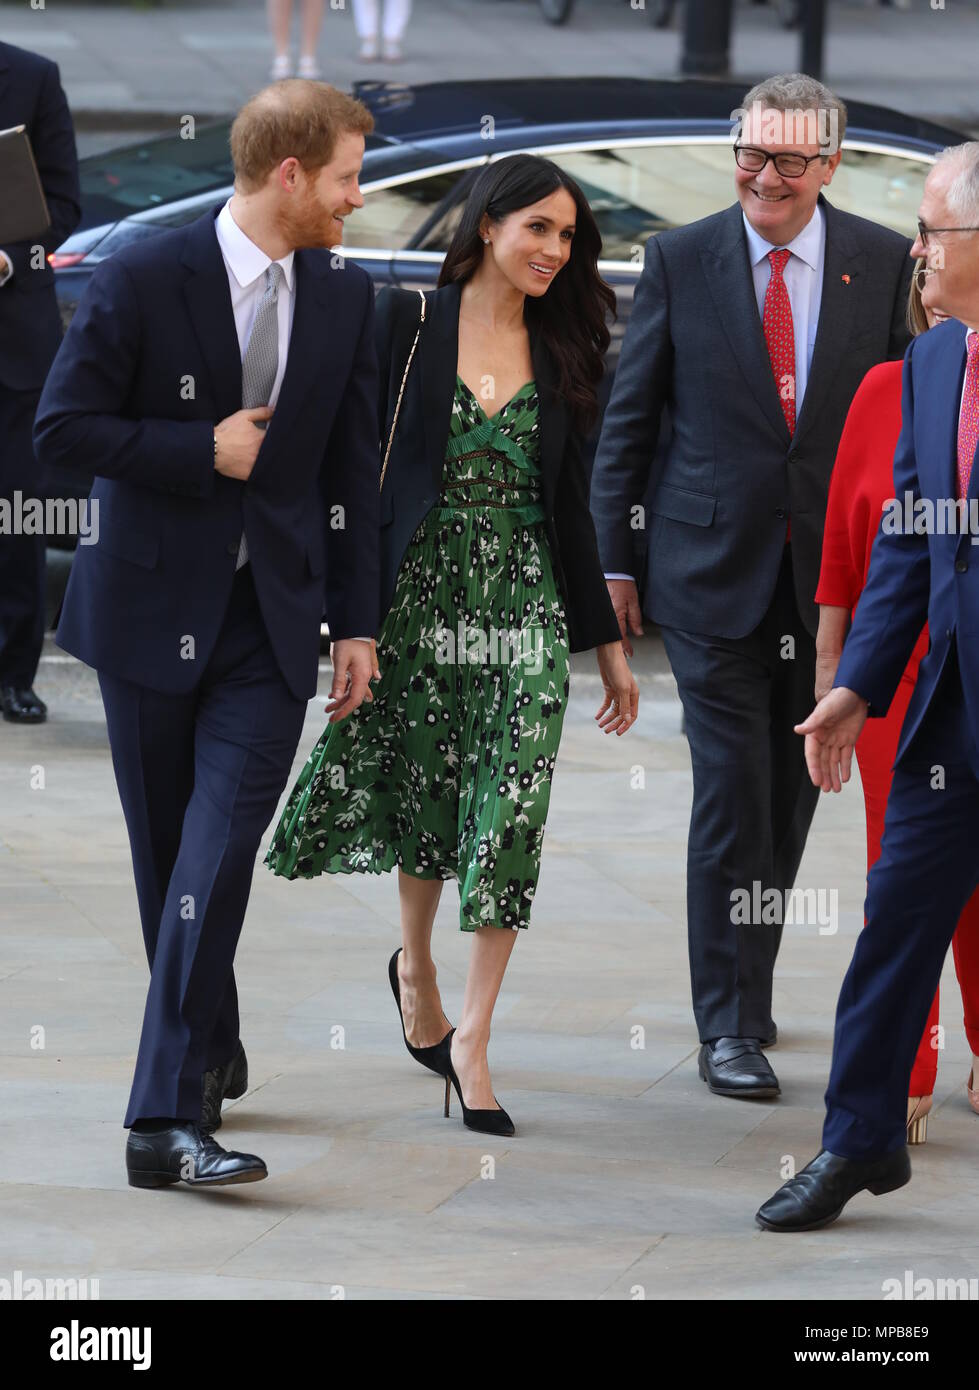 Prince Harry and Meghan Markle arrive at Australia House in London to meet with the Australian High Commissioner in the lead up to Invictus Games.  Featuring: Prince Harry, Meghan Markle, Australian High Commissioner Alexander Downer Where: London, United Kingdom When: 21 Apr 2018 Credit: David Sims/WENN.com Stock Photo